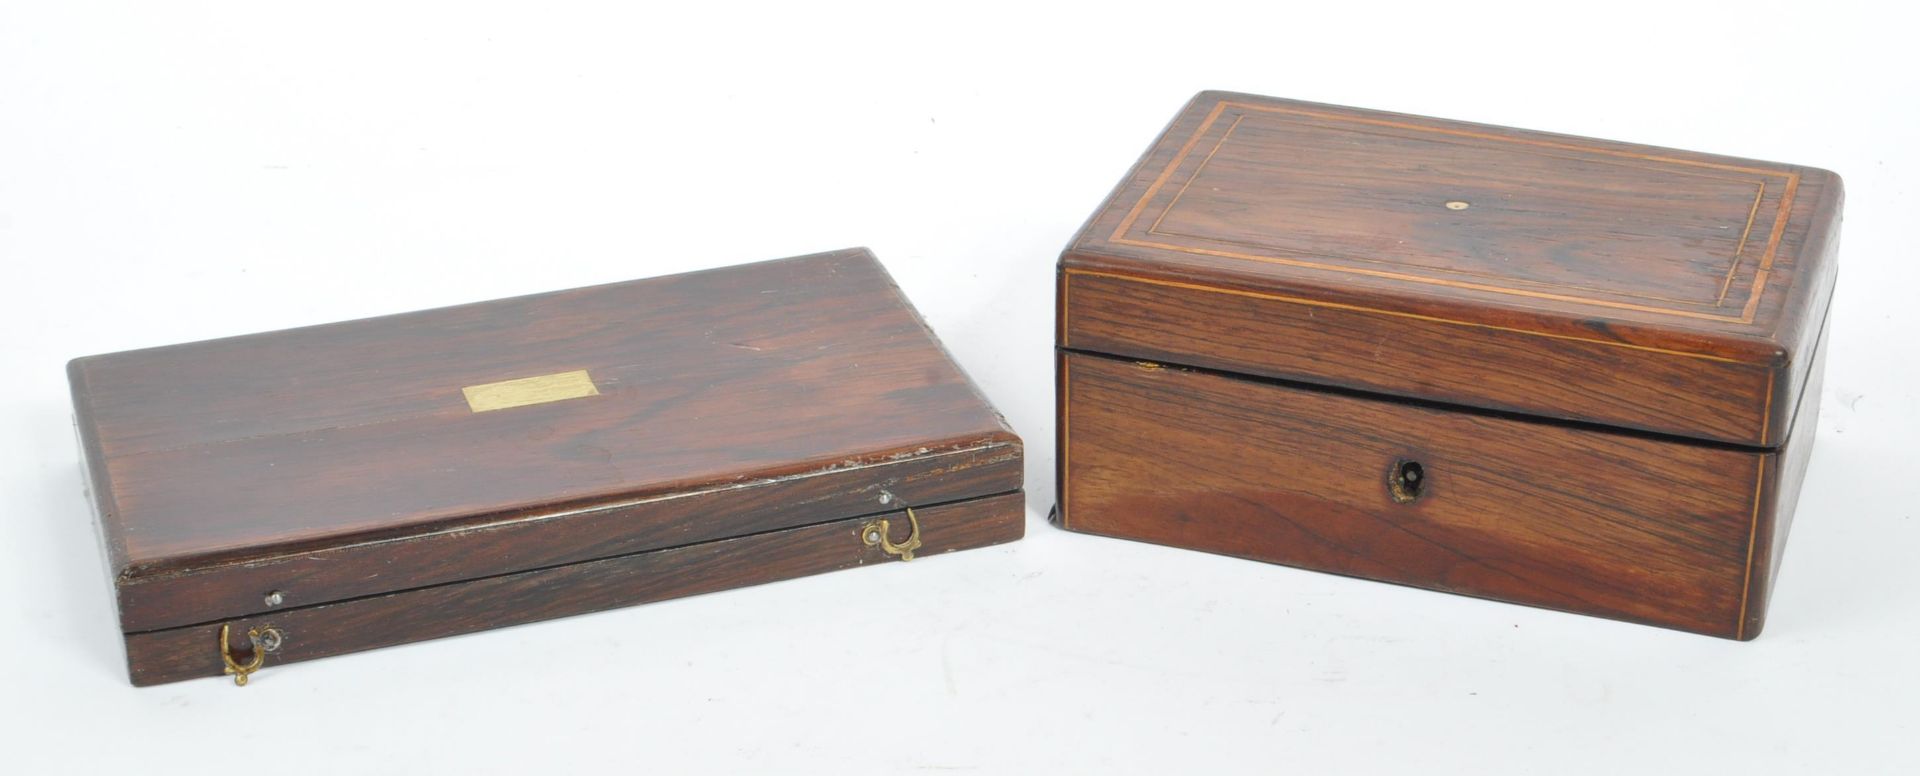 COLLECTION OF THREE WOODEN TRINKET BOXES - Image 5 of 6